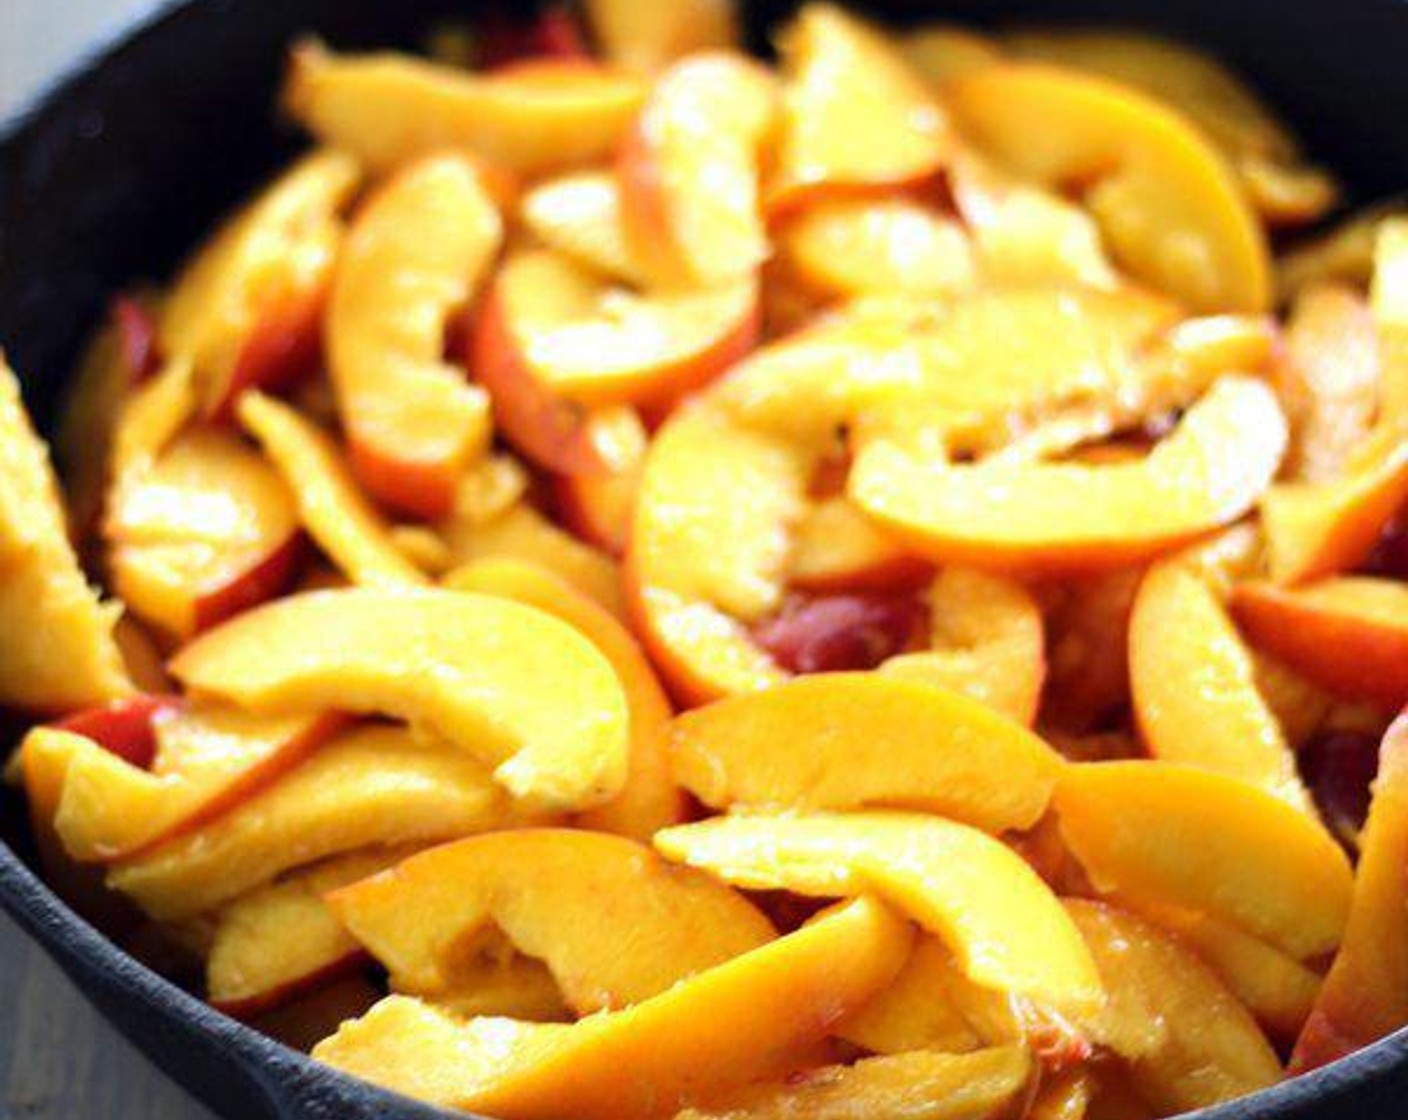 step 2 In a 10 inch cast iron skillet, heat Butter (2 Tbsp) over medium heat. Add the Peaches (8), Granulated Sugar (2/3 cup), juice from Lemon (1), Vanilla Extract (1/2 tsp), Ground Ginger (1 pinch), and Salt (1 pinch). Stir and cook the peaches until bubbly, about 5 minutes.